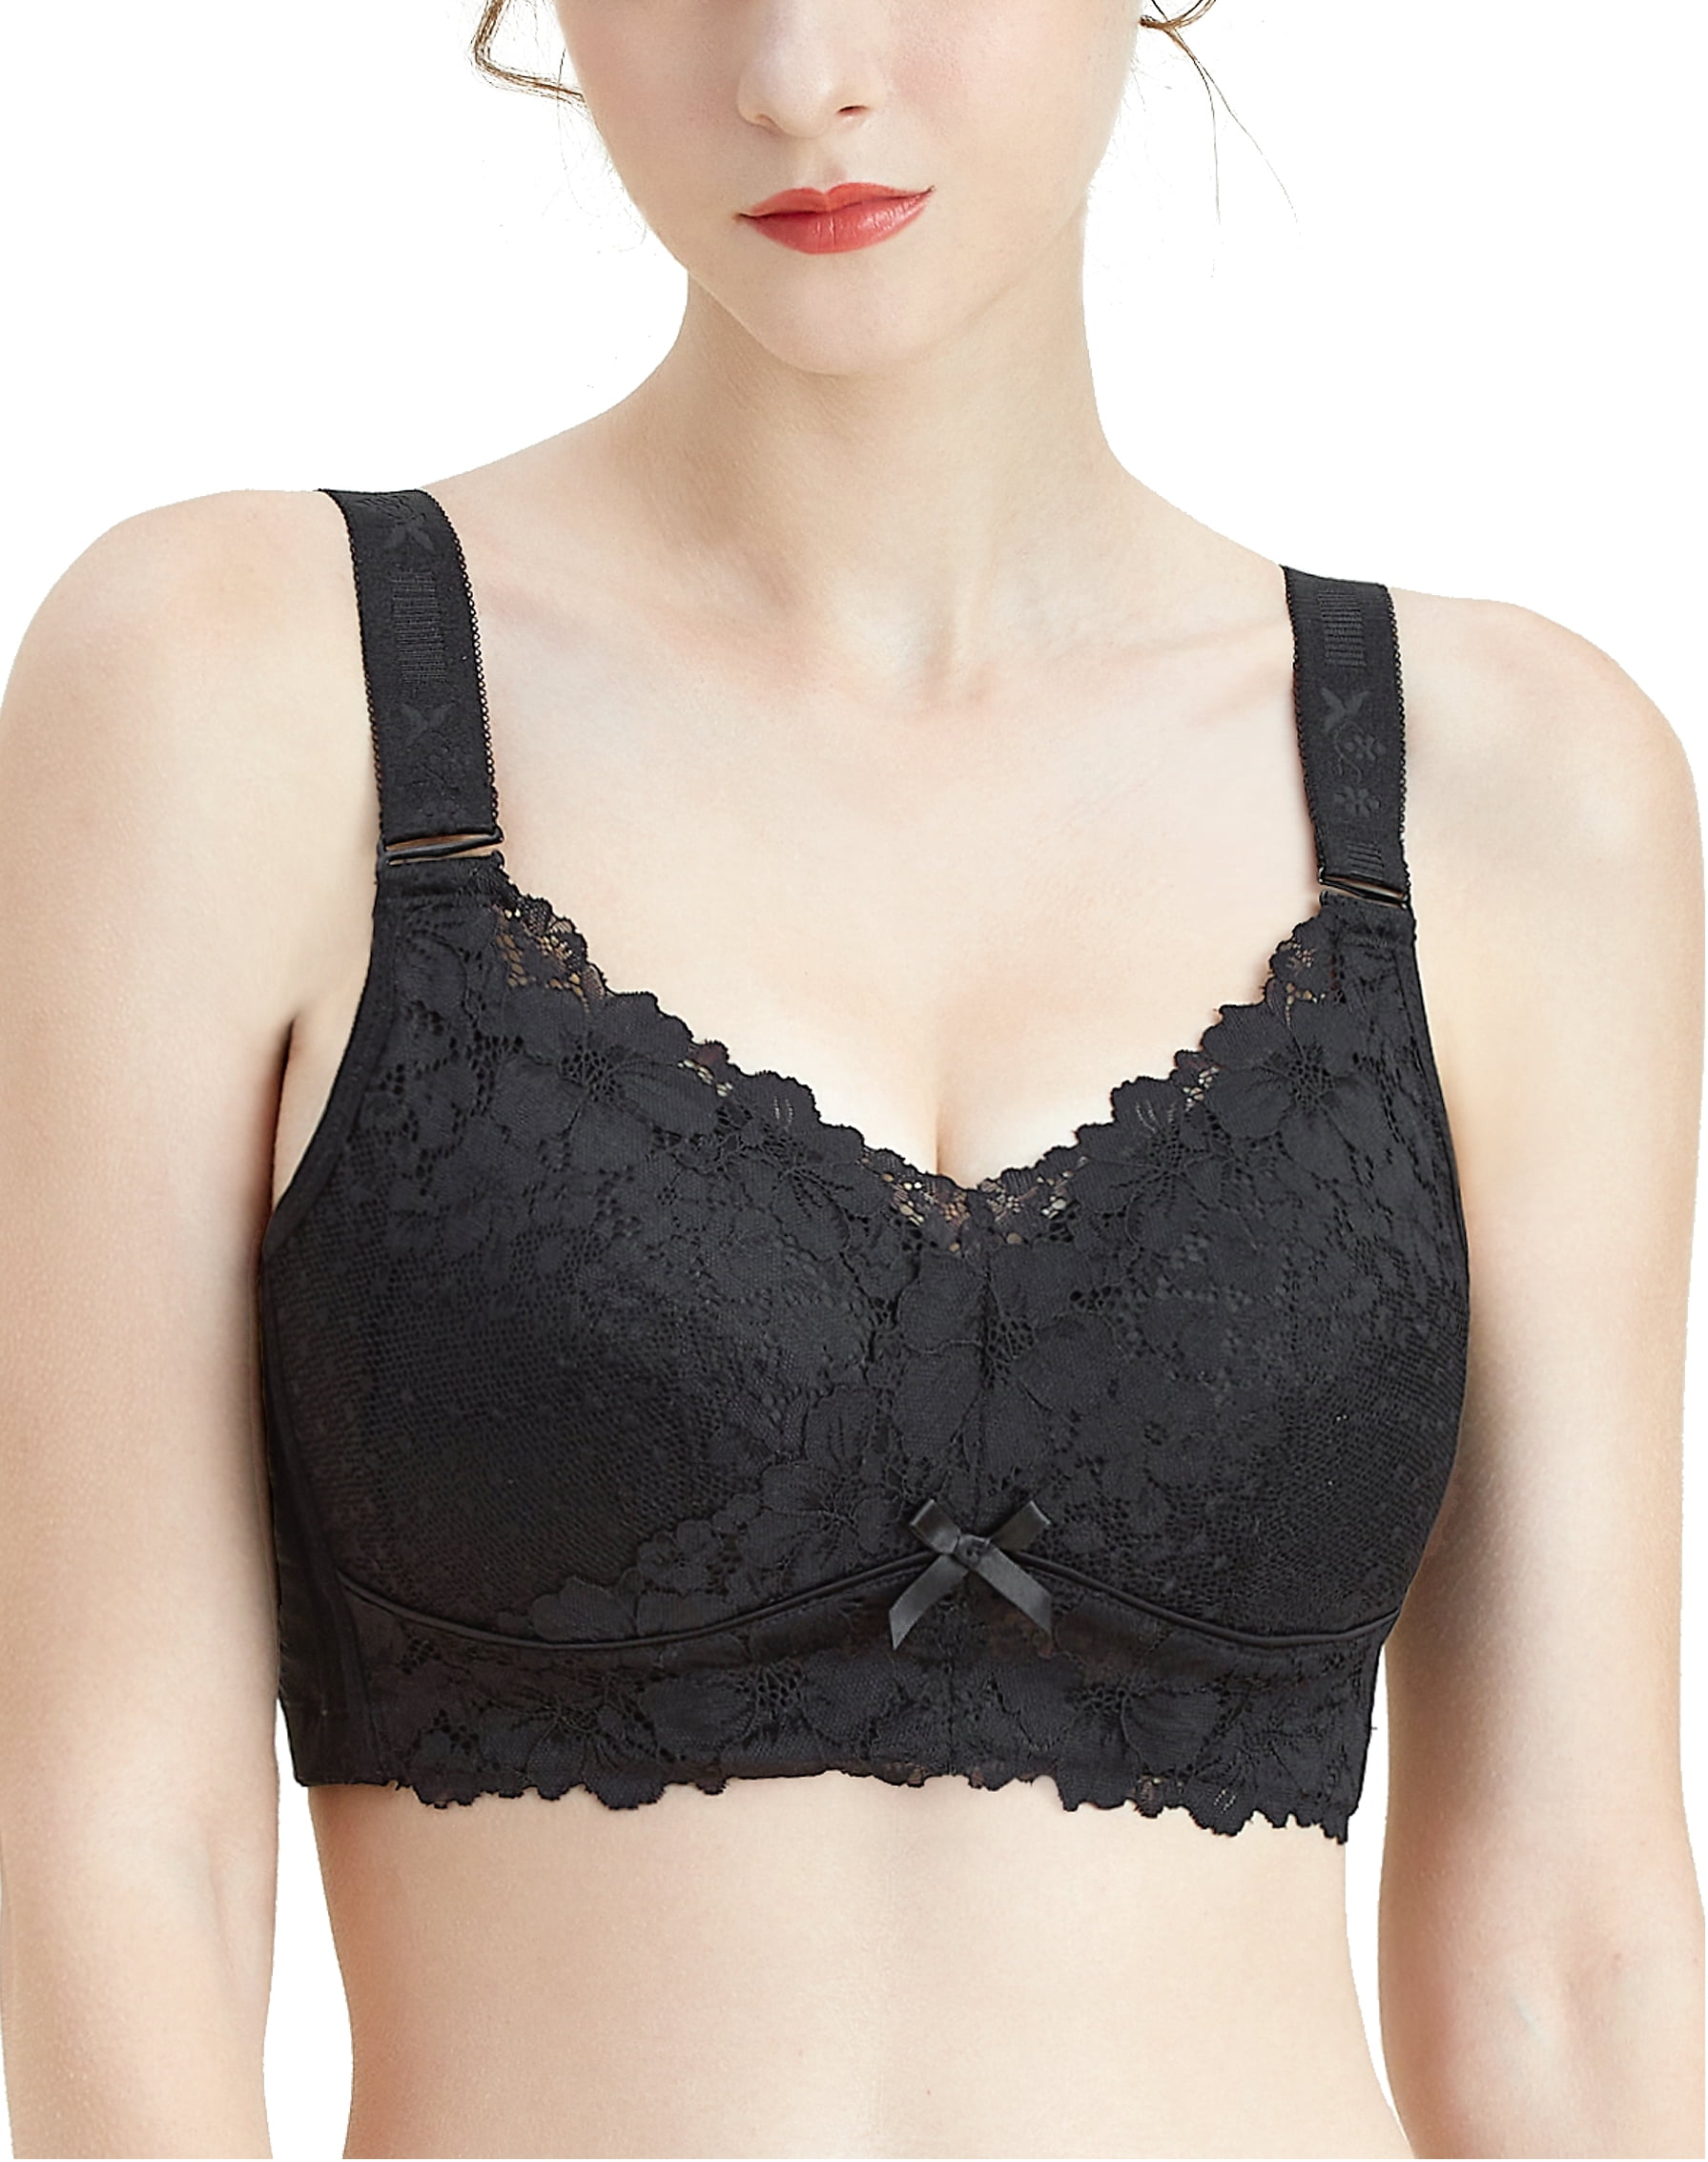 Bras for Women No Underwire, Supportive Minimizer Bras for Women Full  Coverage, Cotton Wireless Bras for Large Breasted Women with Honeycomb  Inner